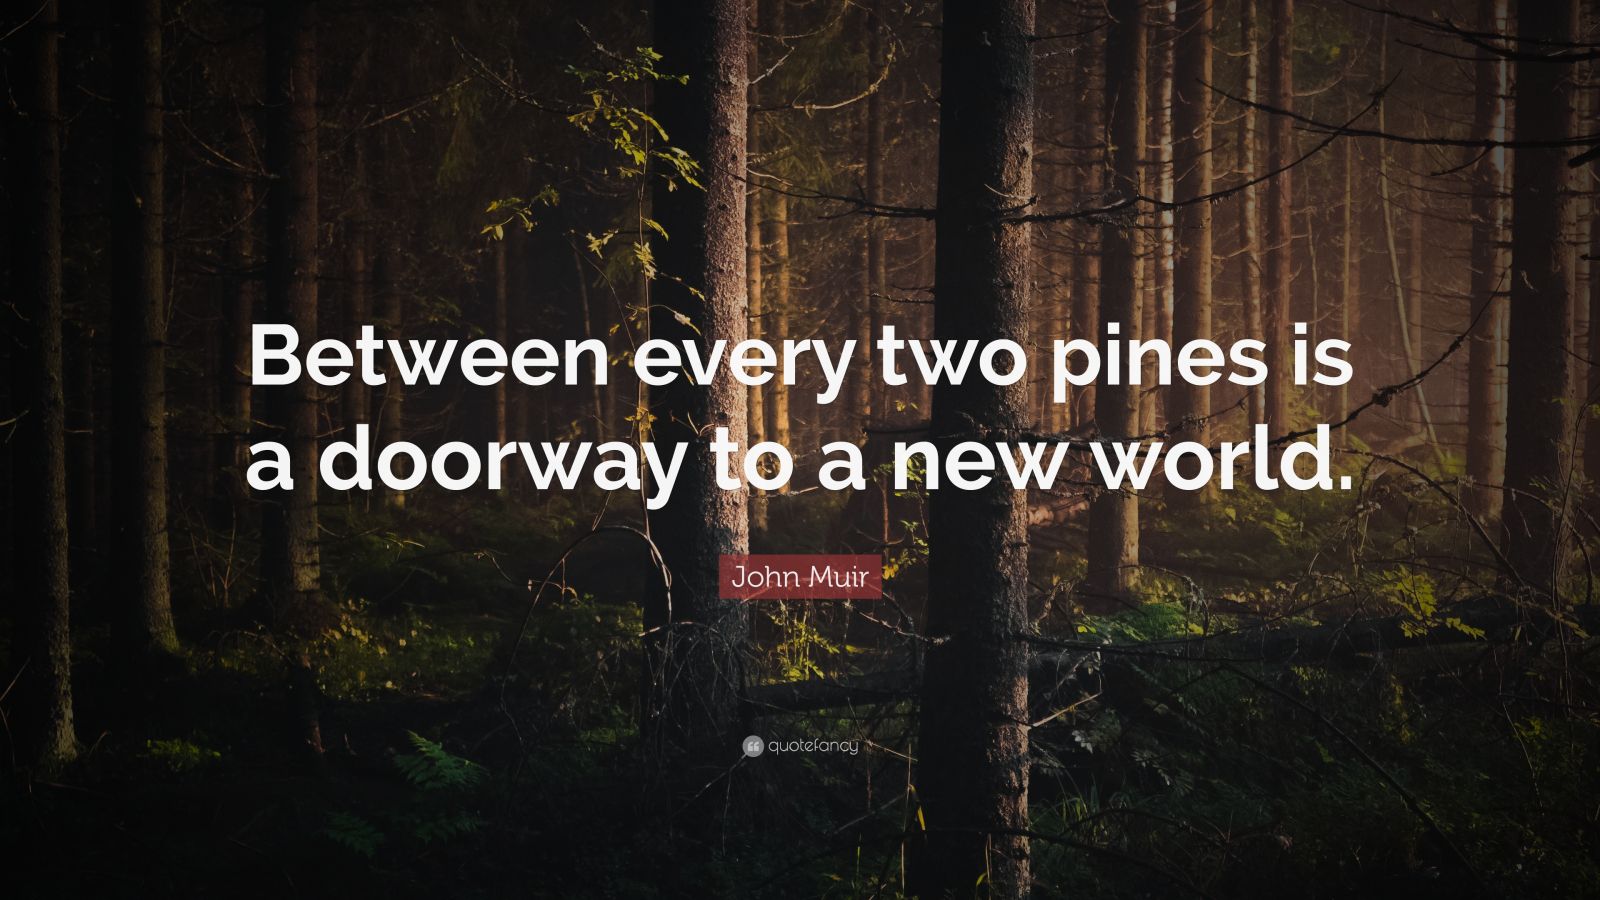 6361467 John Muir Quote Between every two pines is a doorway to a new